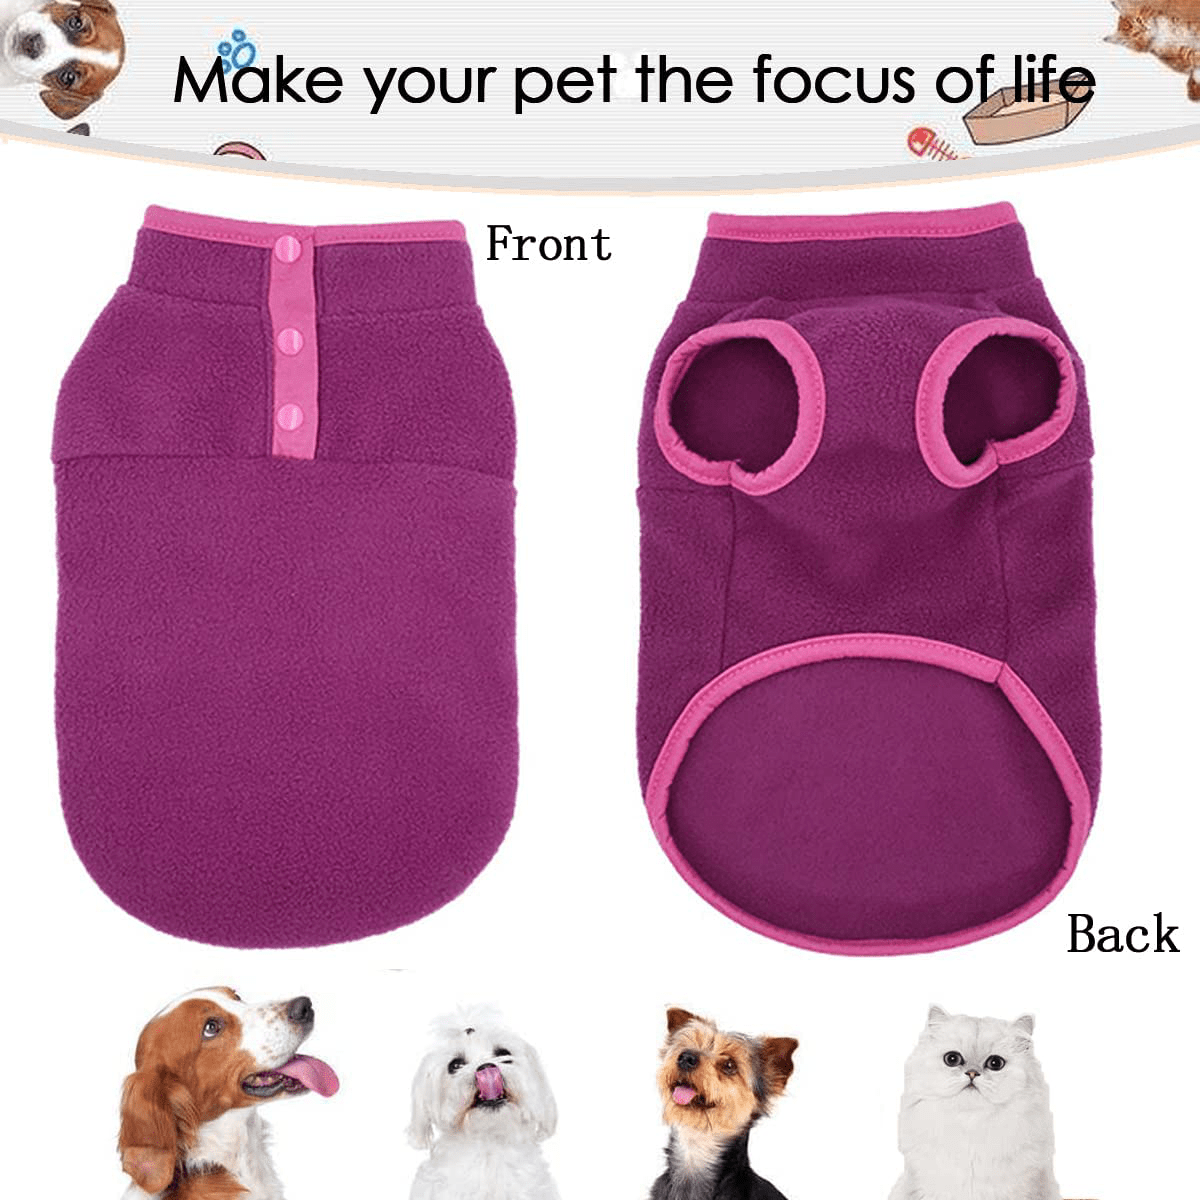 2 Pack Dog Fleece Vest Sweater, Warm Pullover Fleece Puppy Jacket, Autumn Winter Cold Weather Coat Clothes, Pet Stretch Fleece Apparel with Buttons Costumes for Small Medium Dogs Cats